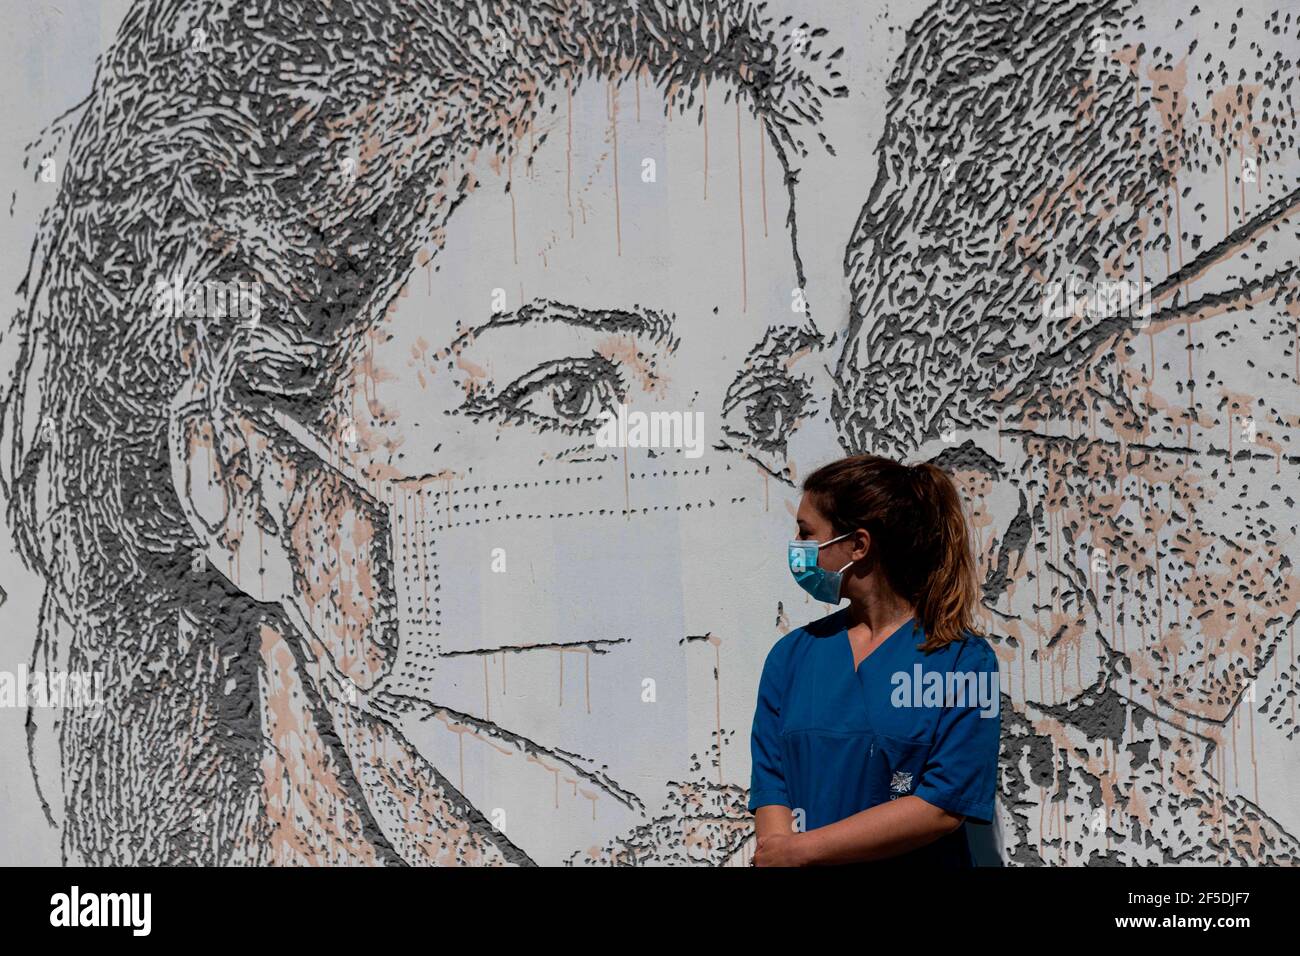 June 19, 2020, Porto, Portugal: PatrÃcia Botelho, nurse, poses in front of her portrait by Vhils, a famous Portuguese street artist, who sculpted the mural â€œLinha da Frente: Projeto Scratching the Surfaceâ€, meaning ''Frontline: Project Scratching the Surface'' paying tribute to all the hospital staff in the frontline. Not only doctors and nurses but also janitors and receptionists..The street murals are located at the Hospital de SÃ£o JoÃ£o, one of the biggest hospitals in Portugal and the main one to take care of COVID-19 patients in the northern part of the country. (Credit Image: © Ter Stock Photo